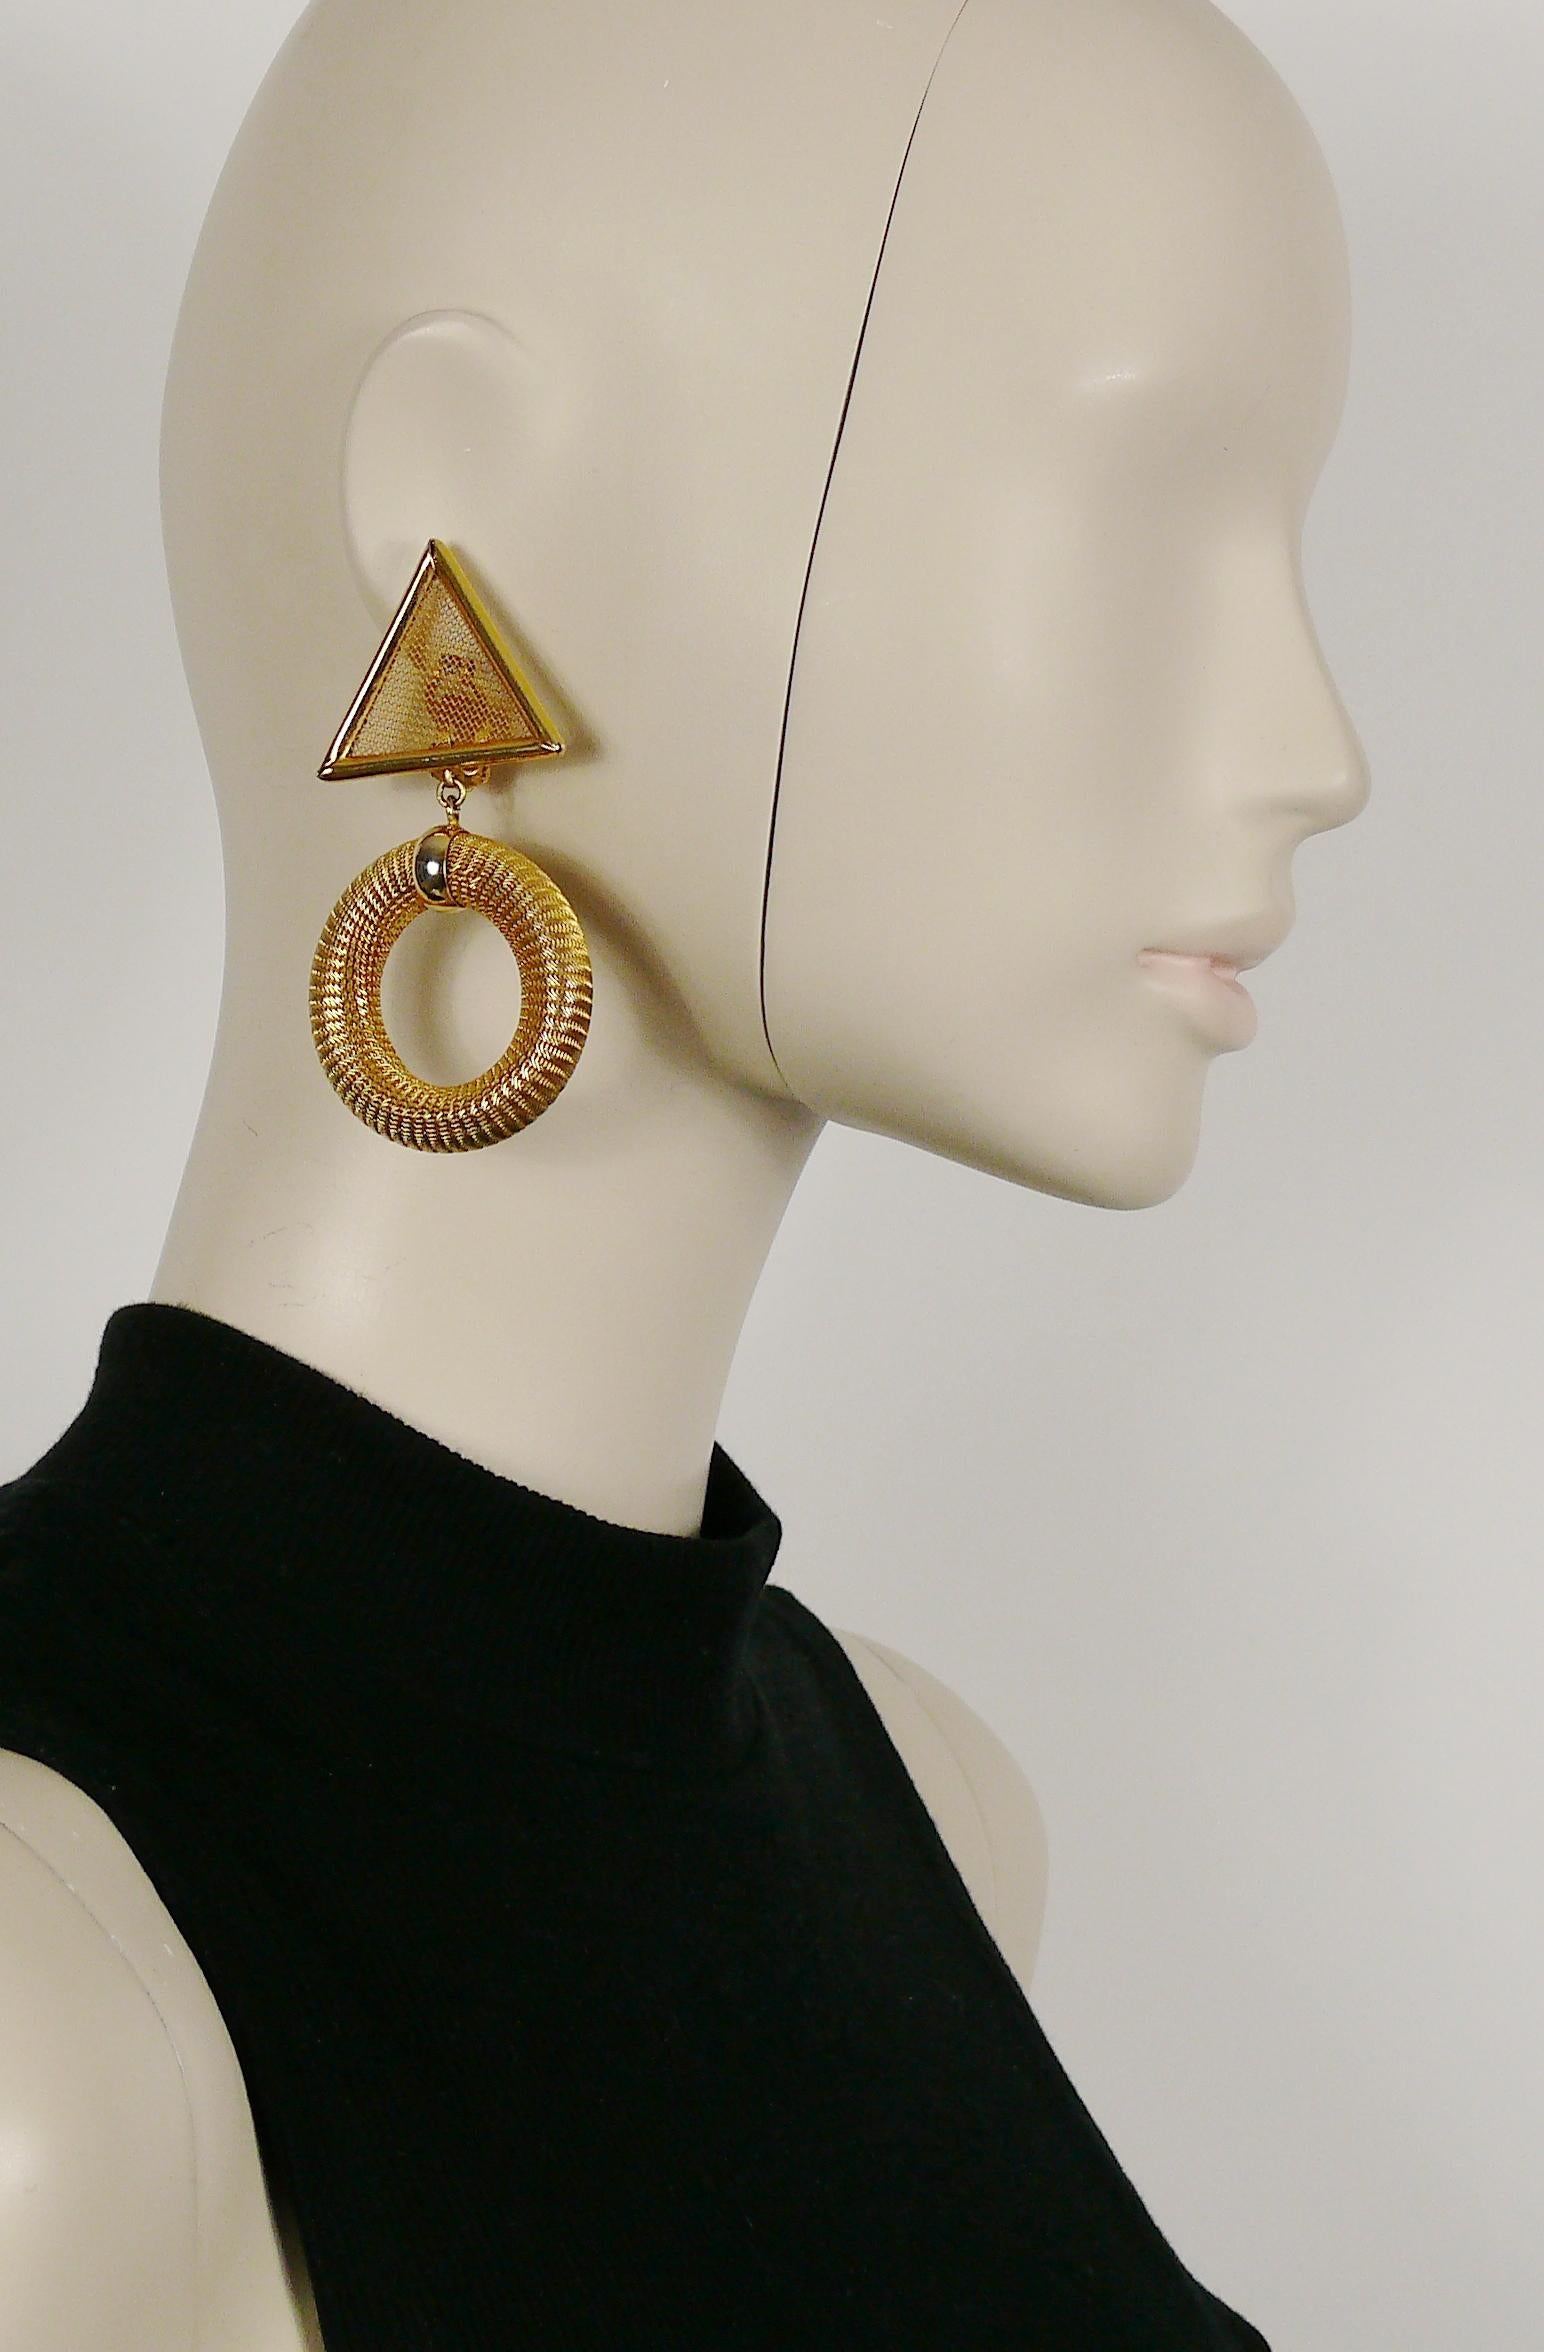 PACO RABANNE vintage gold toned geometric dangling earrings (clip-on).

Marked PACO RABANNE Paris.

Indicative measurements : max. height approx. 8.5 cm (3.35 inches) / max. width approx. 4.5 cm (1.77 inches).

NOTES
- This is a preloved vintage